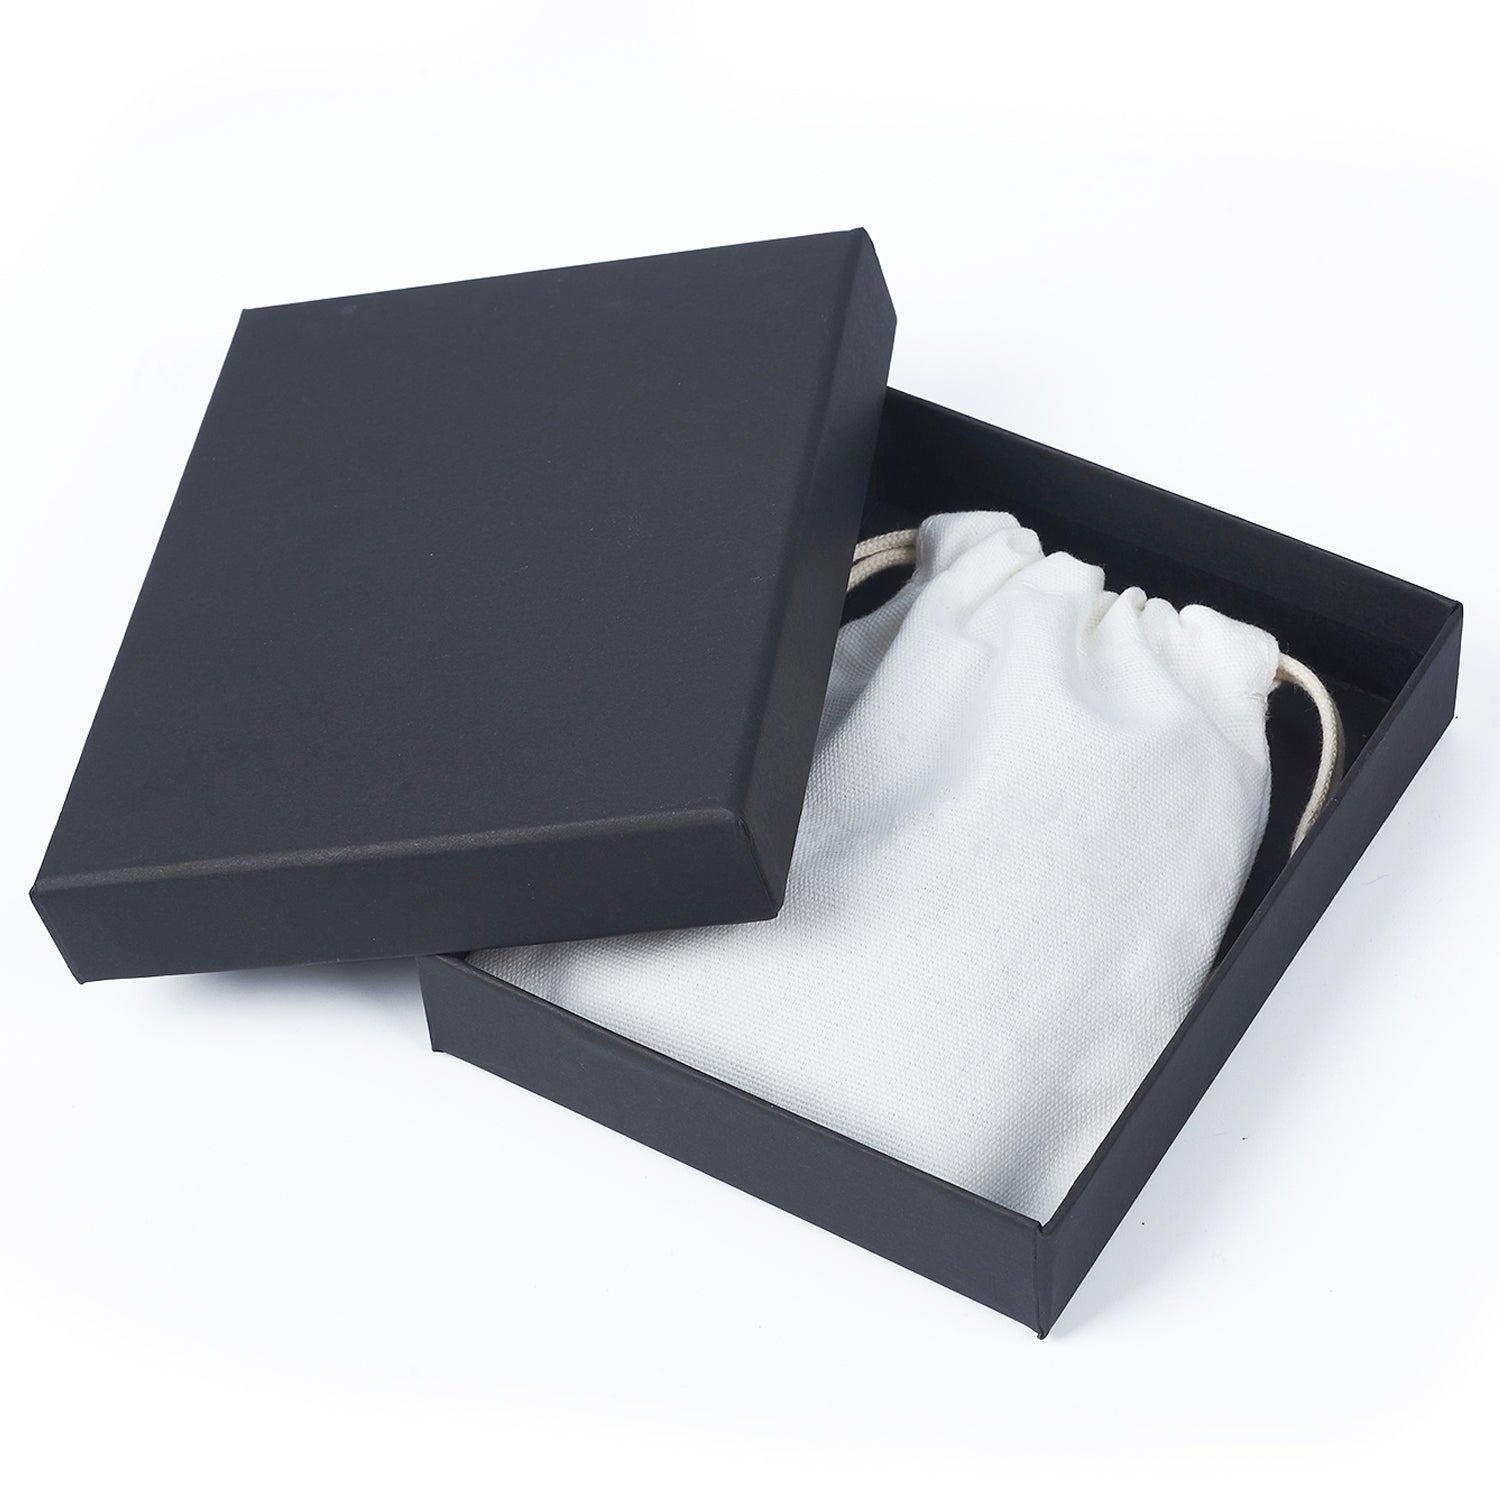 Extra - upgrade to our elegant gift box